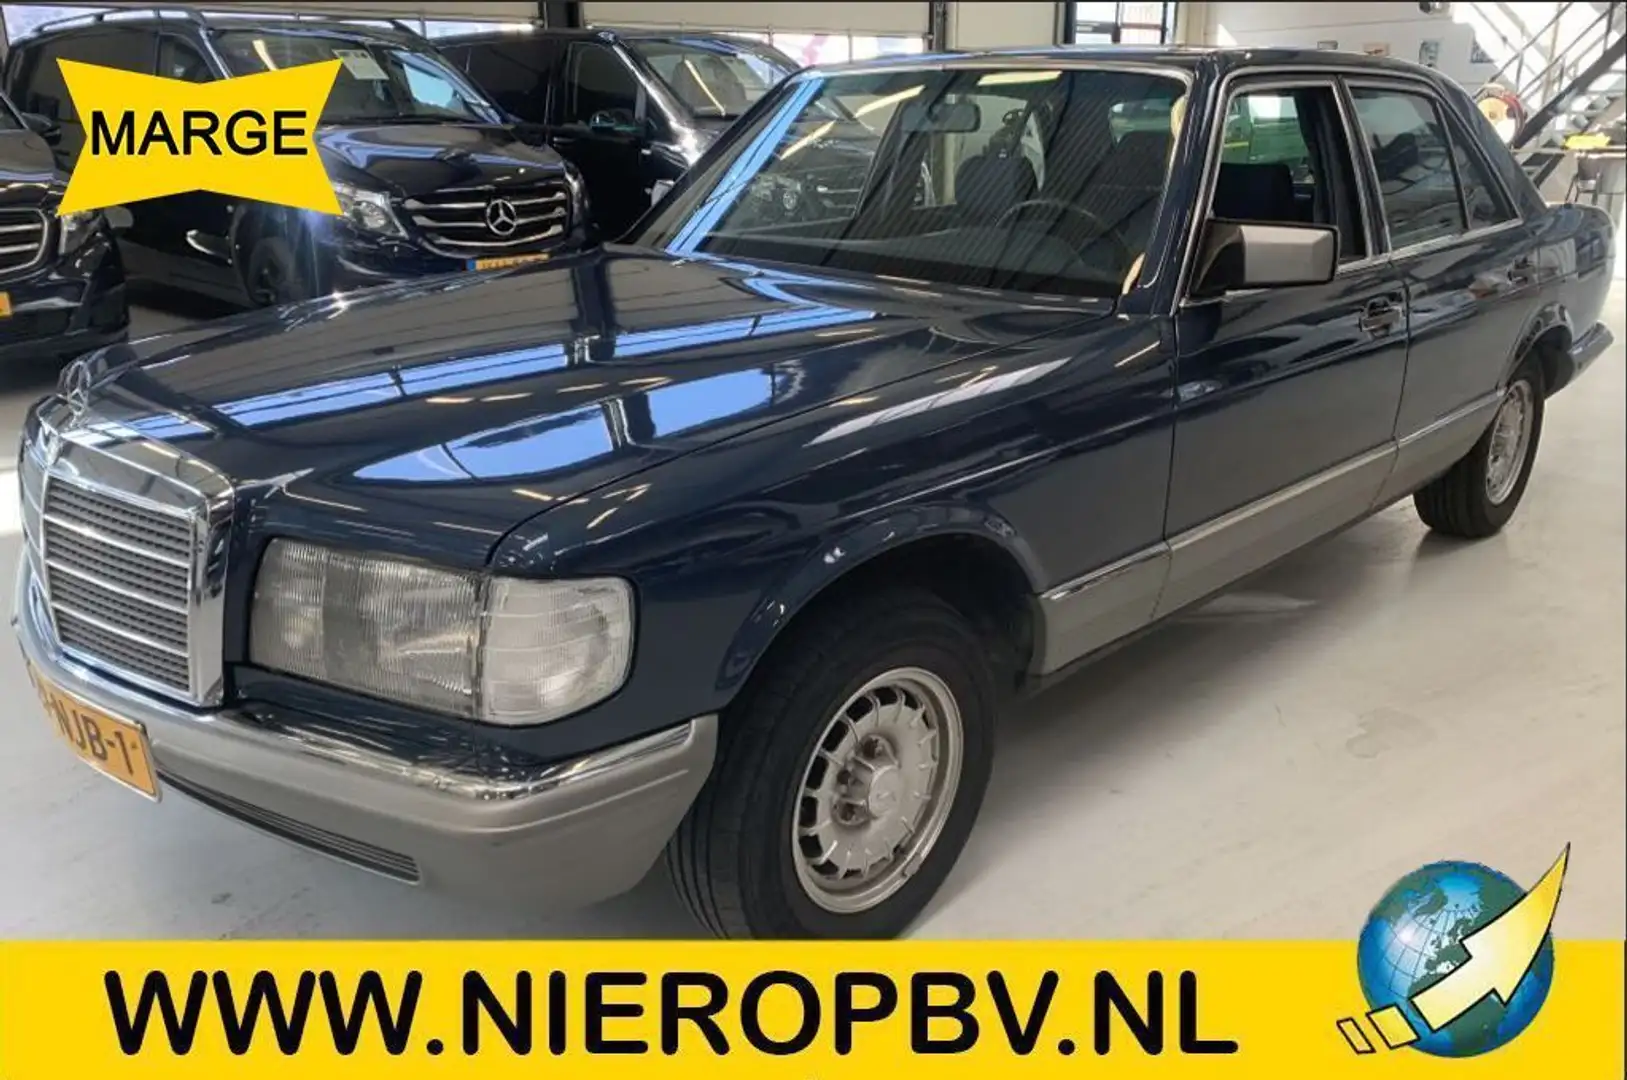 Mercedes-Benz S 280 Airco Automaat 170.000KM MARGE plava - 1